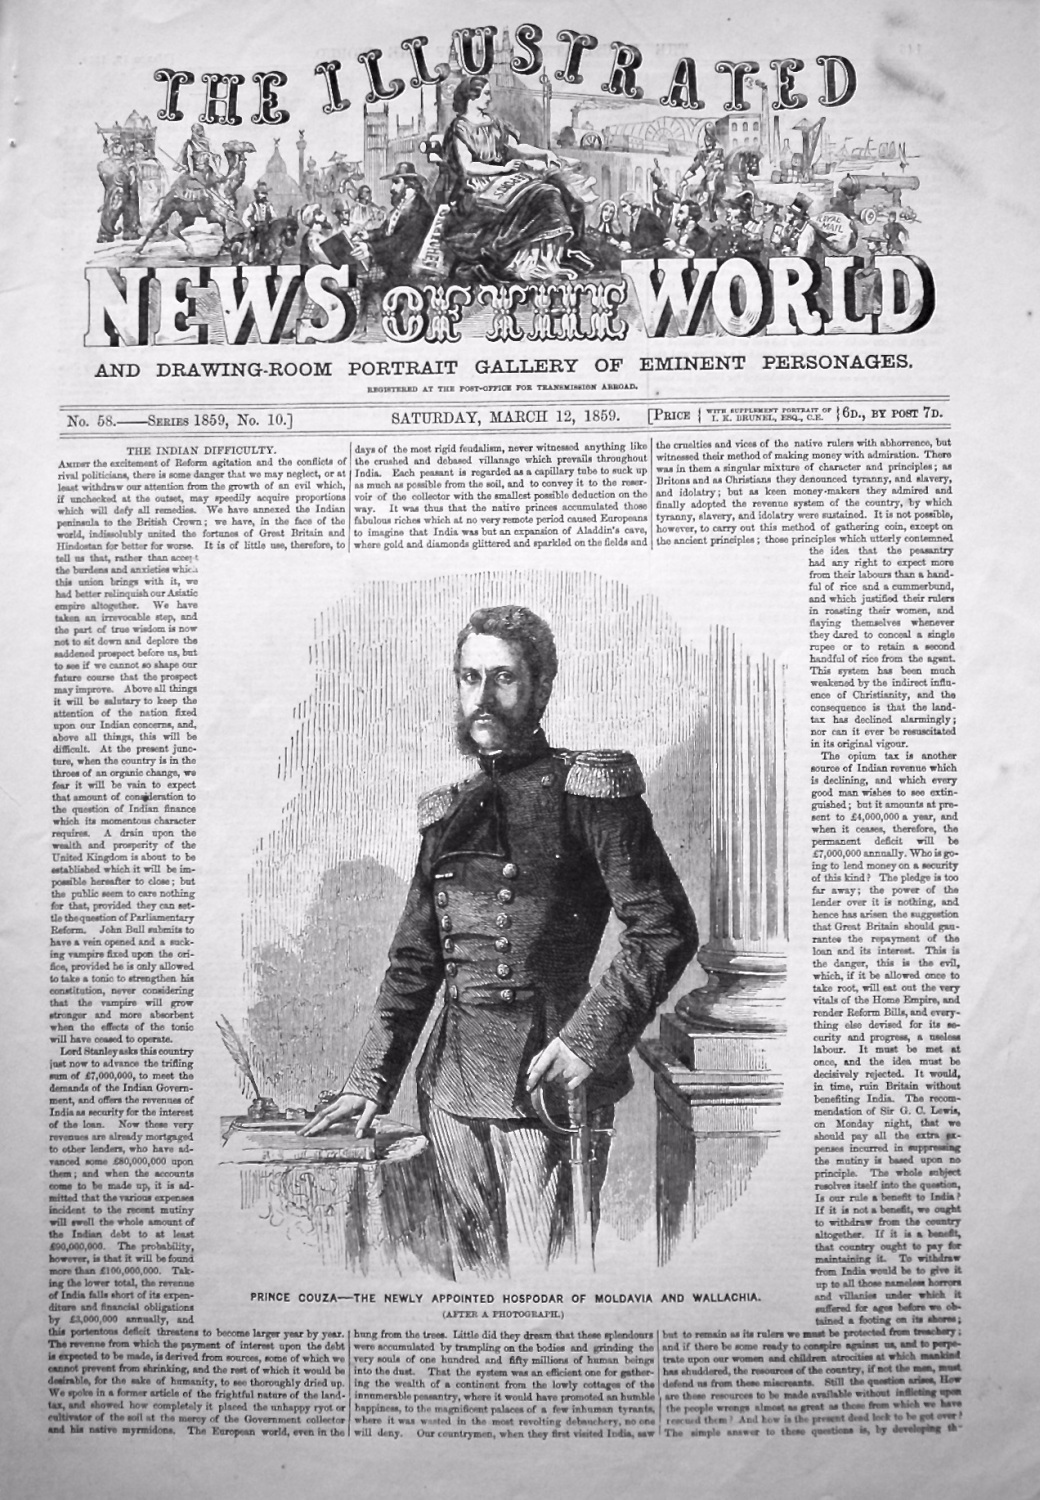 The Illustrated News of the World,  March 12th, 1859.